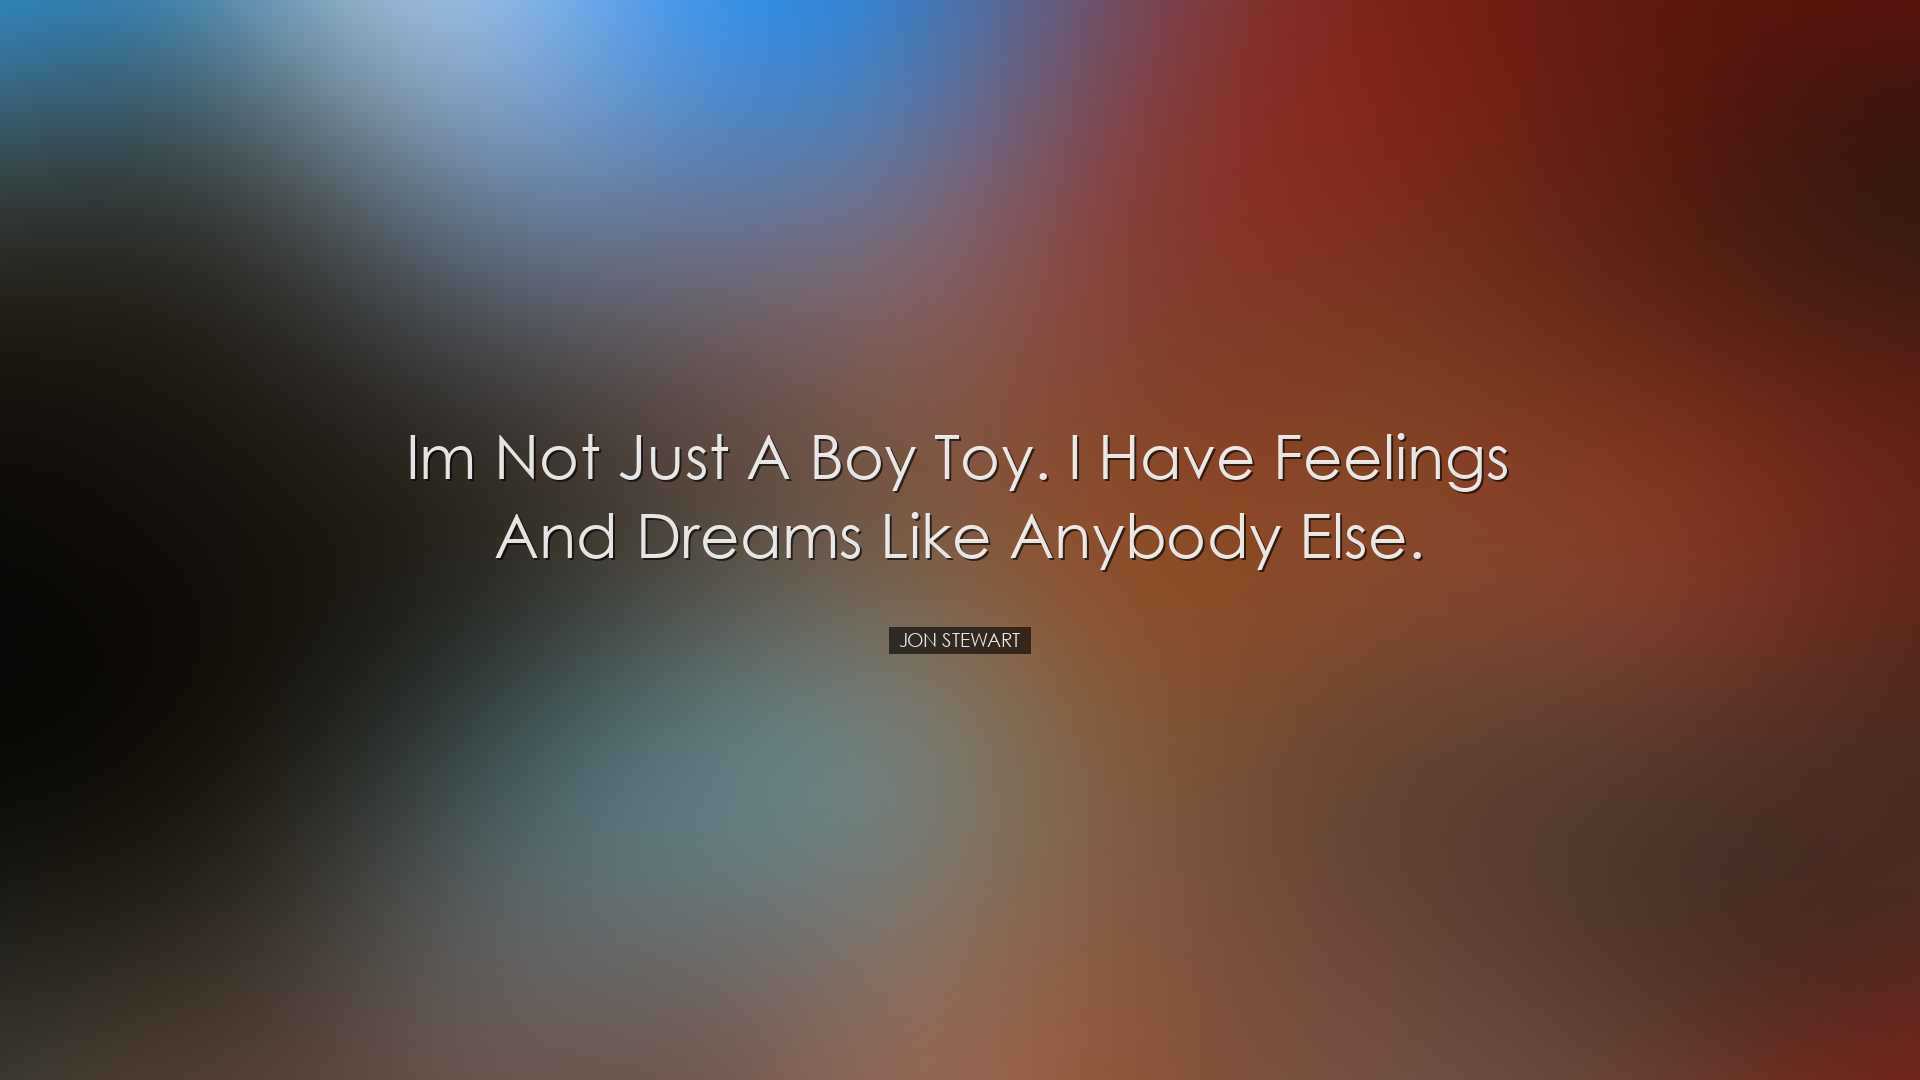 Im not just a boy toy. I have feelings and dreams like anybody els